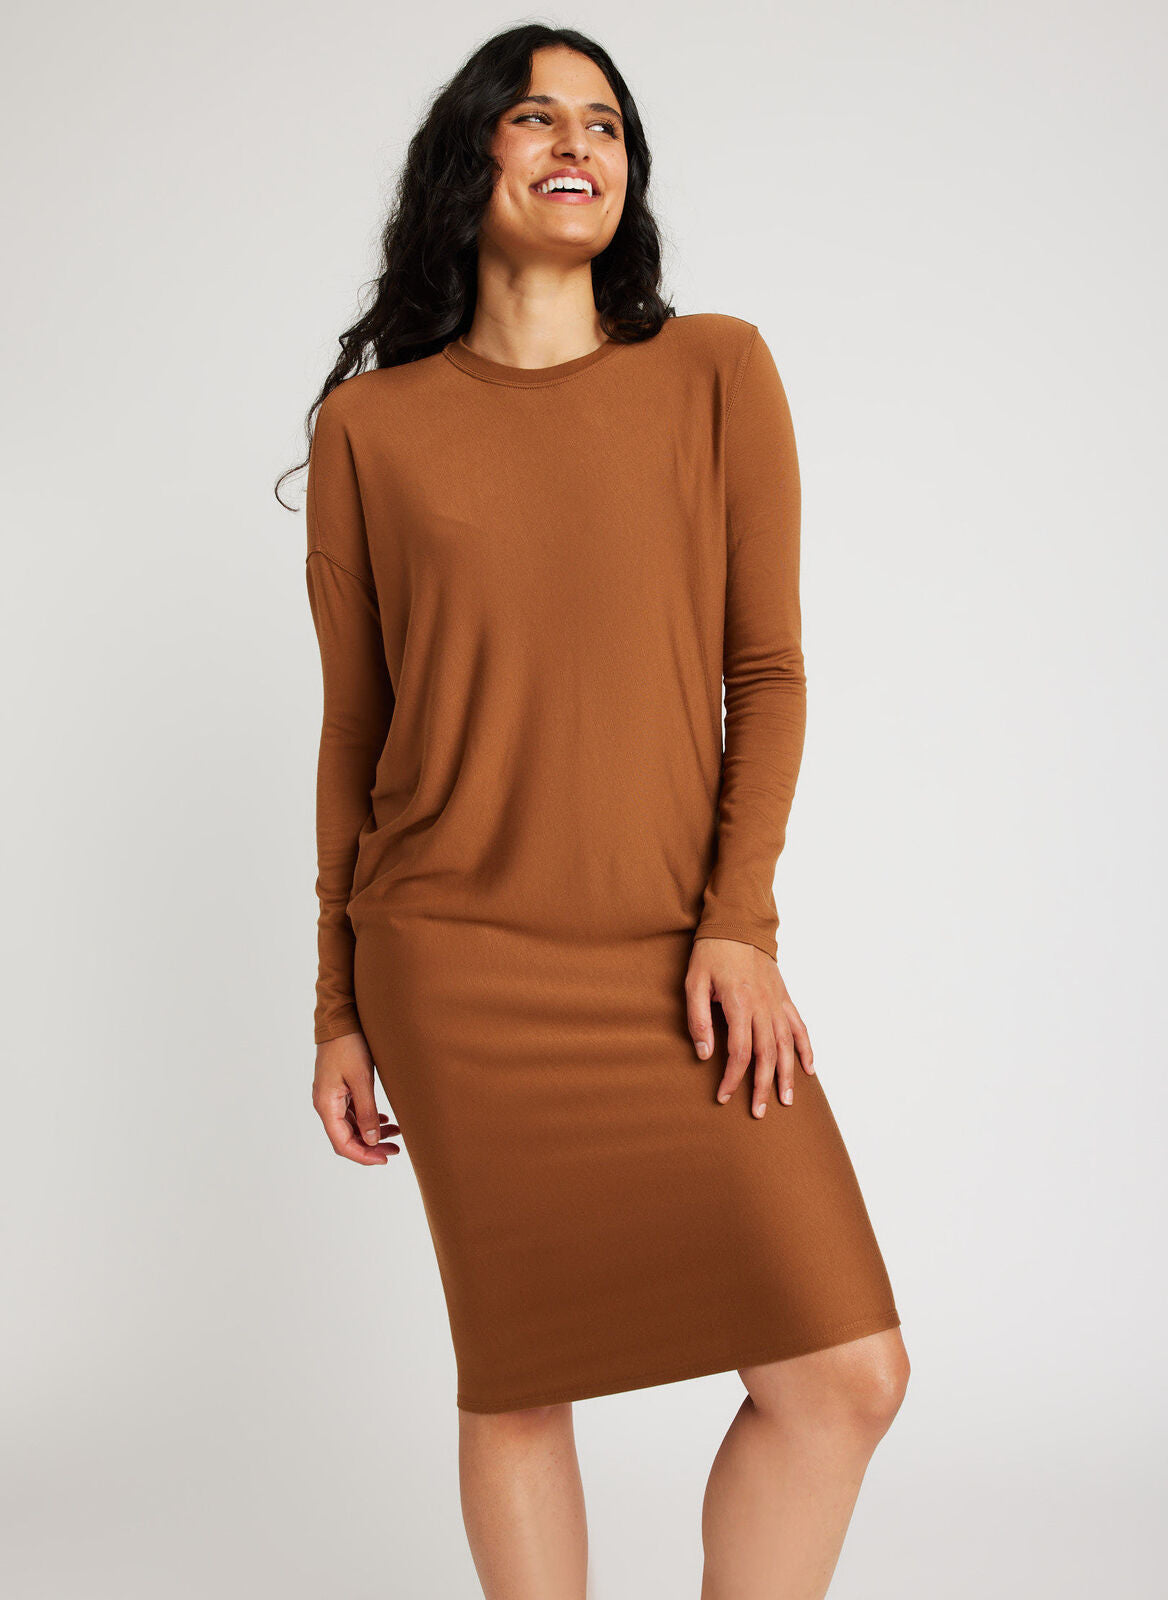 Wave Brushed Long Sleeve Dress | Women's Dresses and Jumpsuits